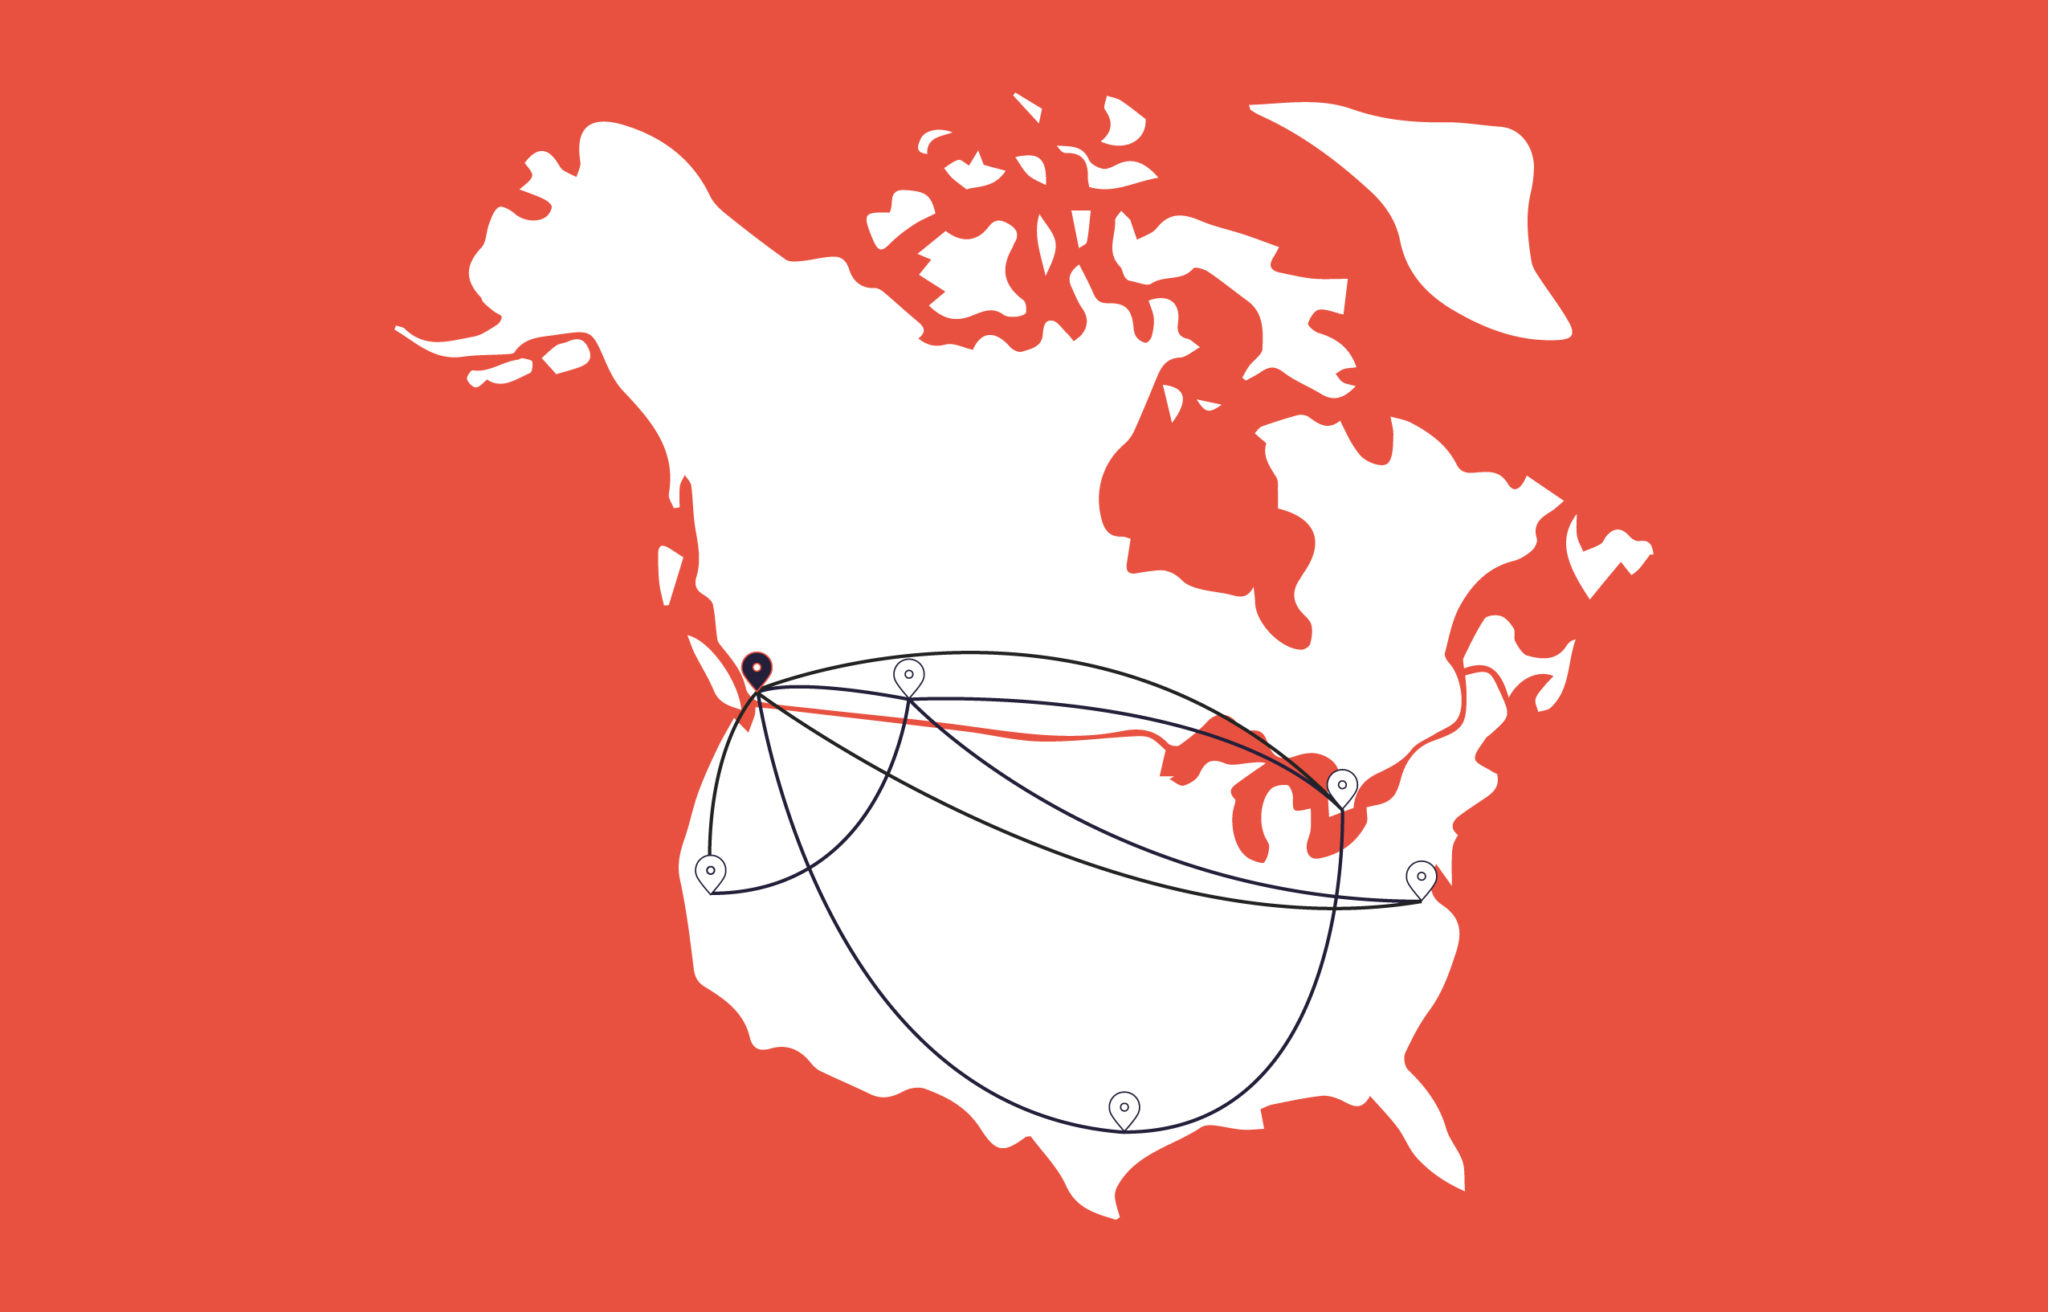 Red and White Graphic features IT/IQ remote team locations simplified map of Canada and the United States using black lines and drop pins to indicate locations